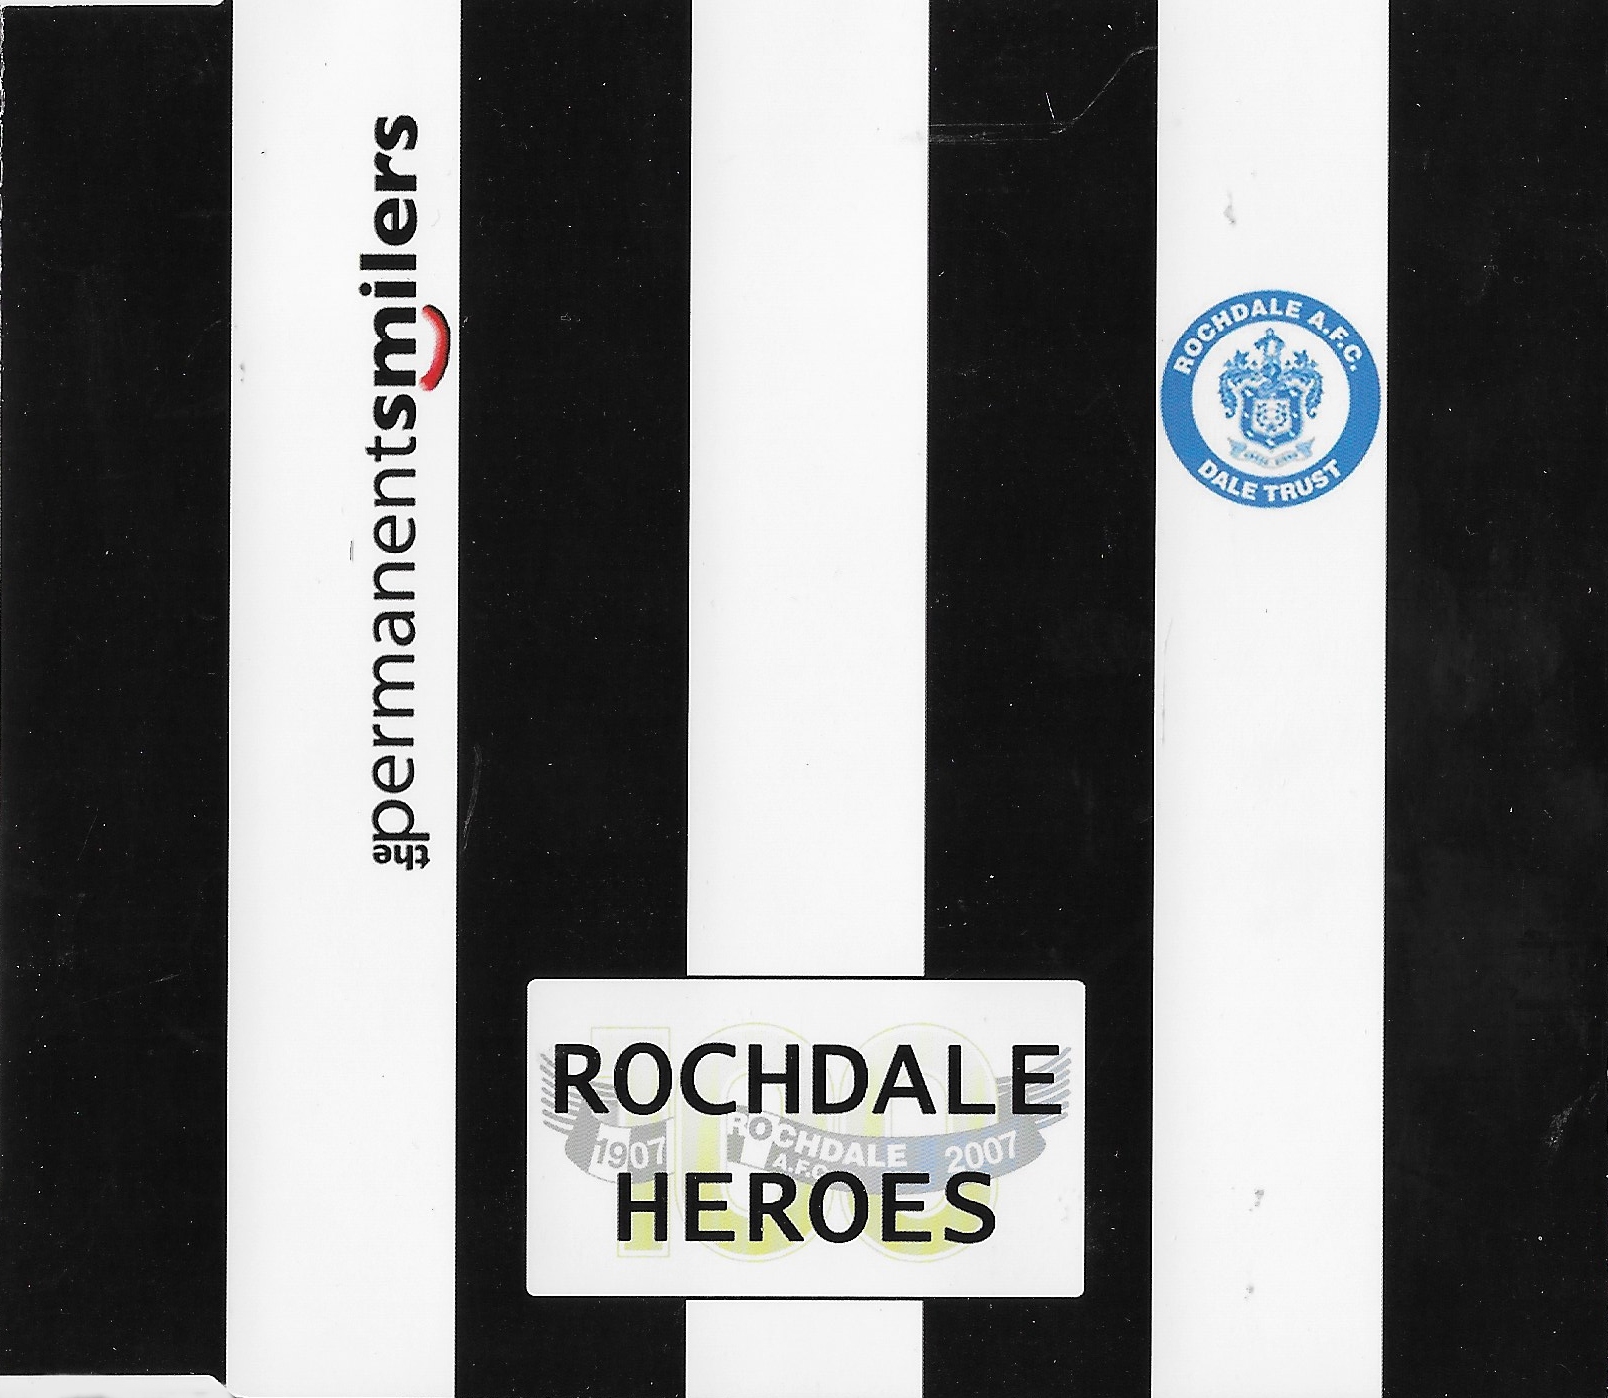 Picture of Rochdale Heroes by artist The Permanent Smilers 